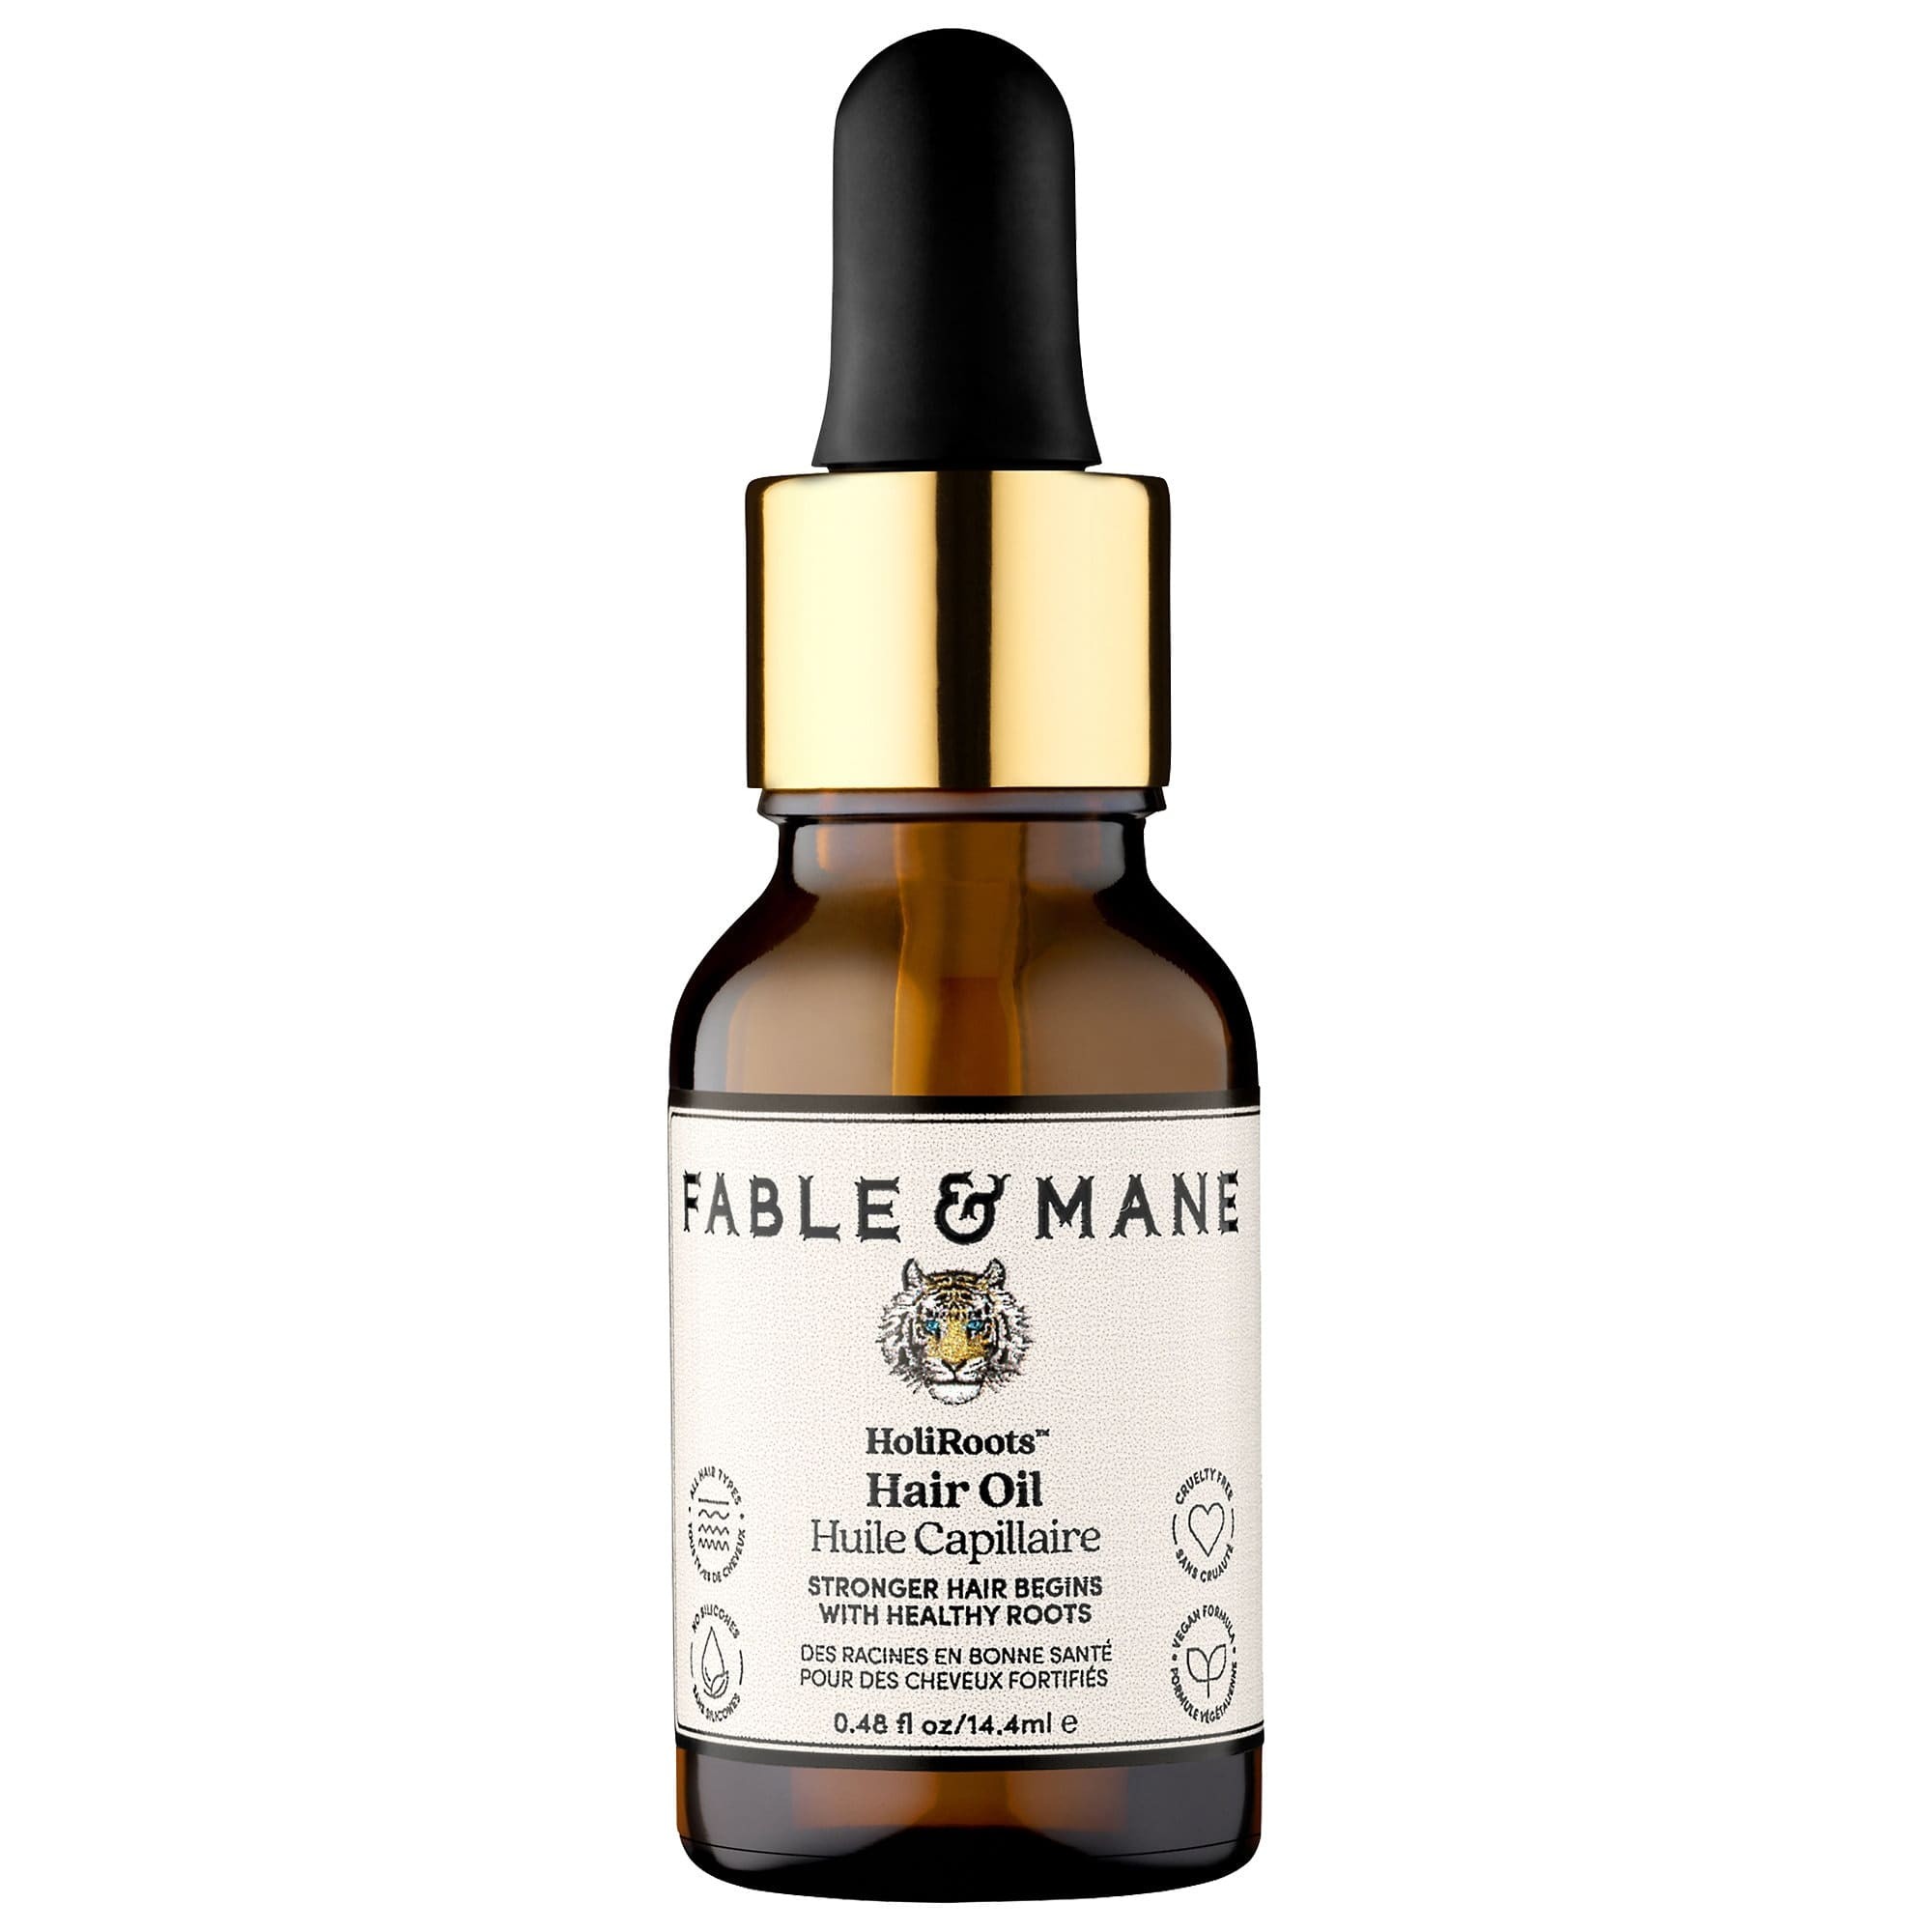 Fable & Mane HoliRoots Pre-wash Hair Treatment Oil Travel Size